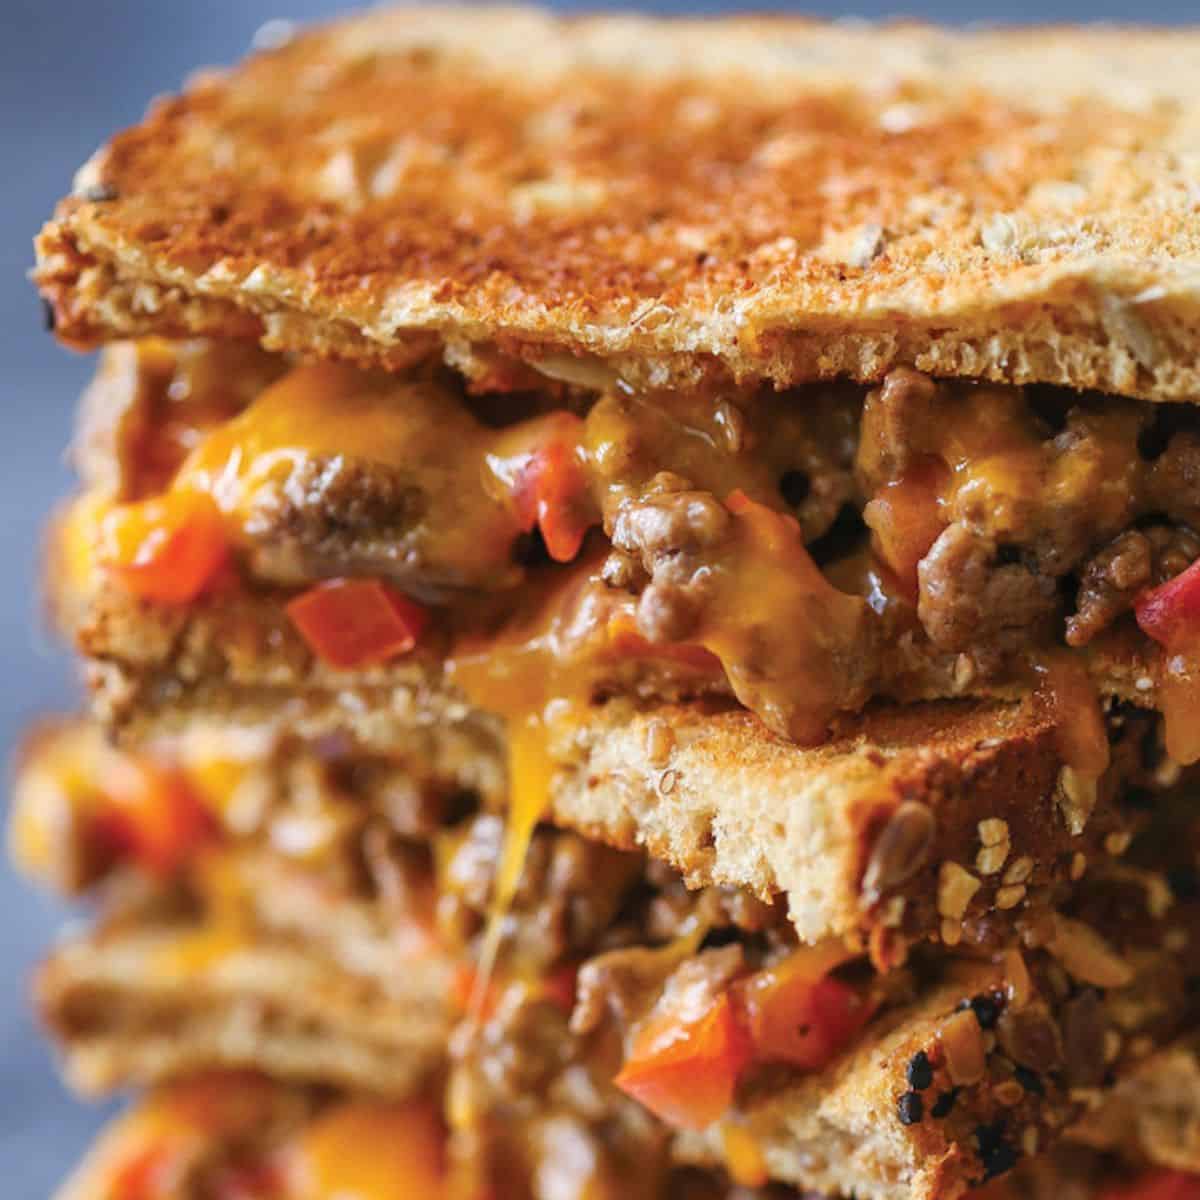 Cheeseburger Grilled Cheese.